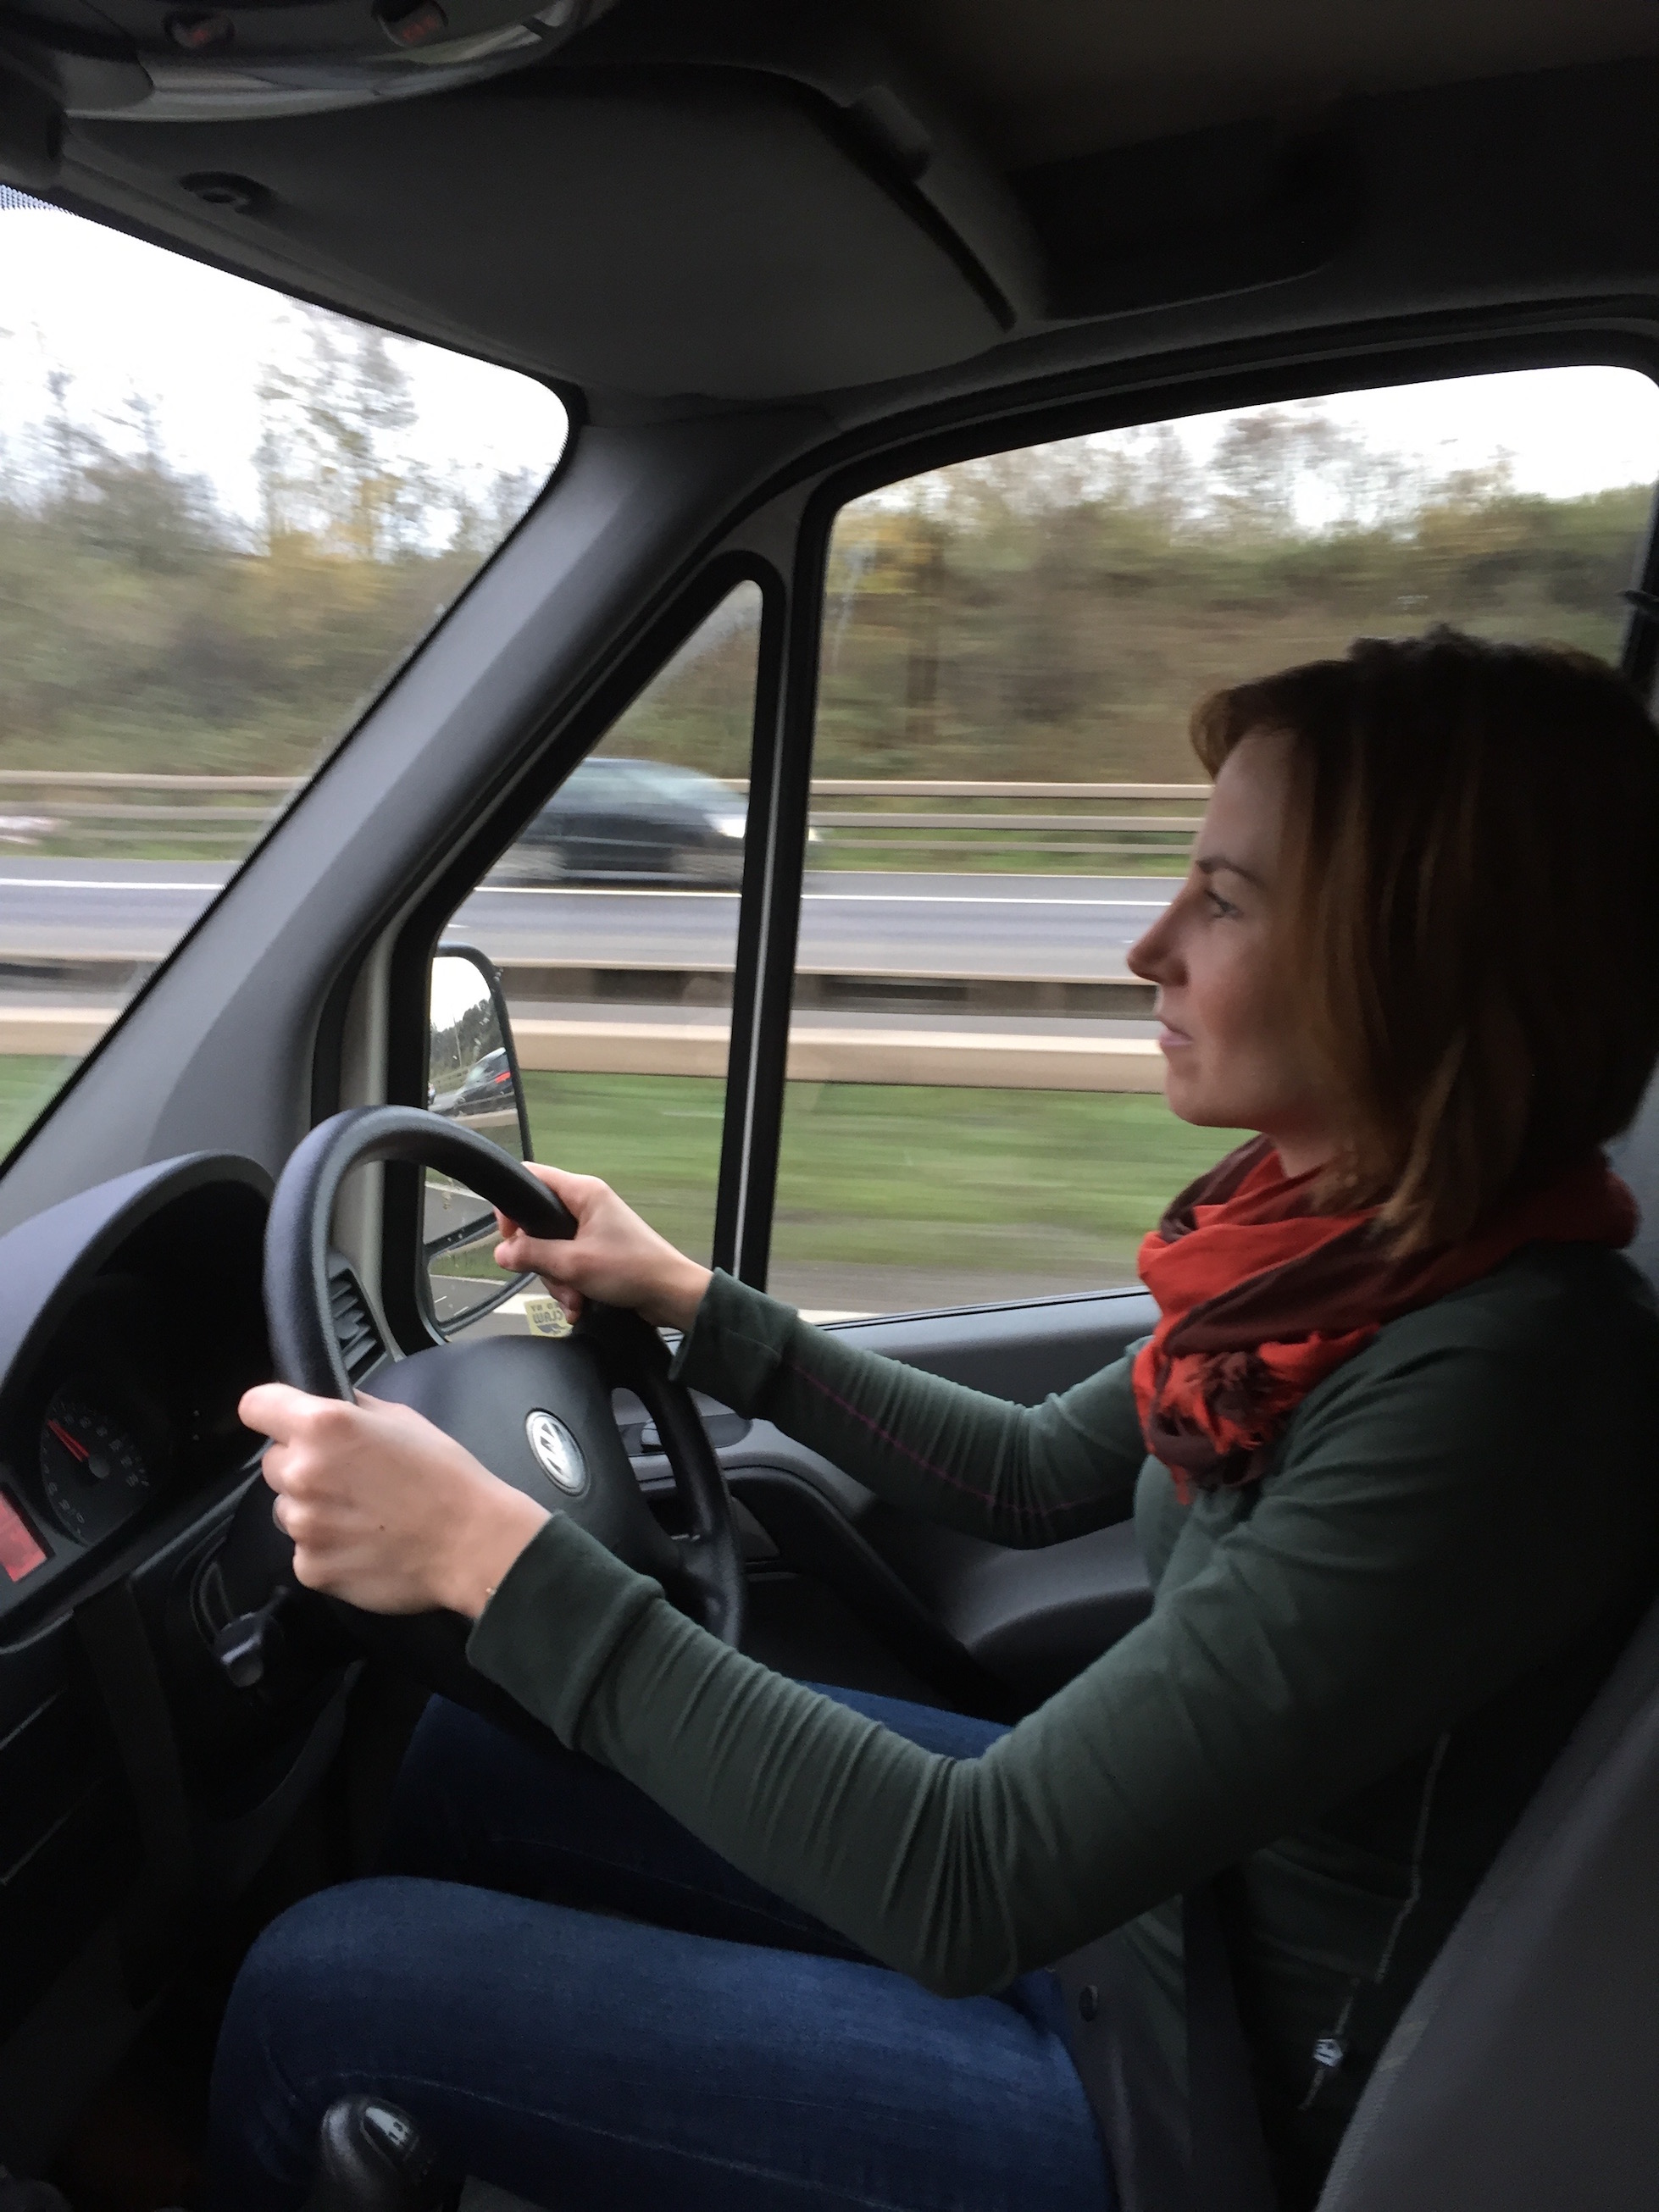 The wife driving the van